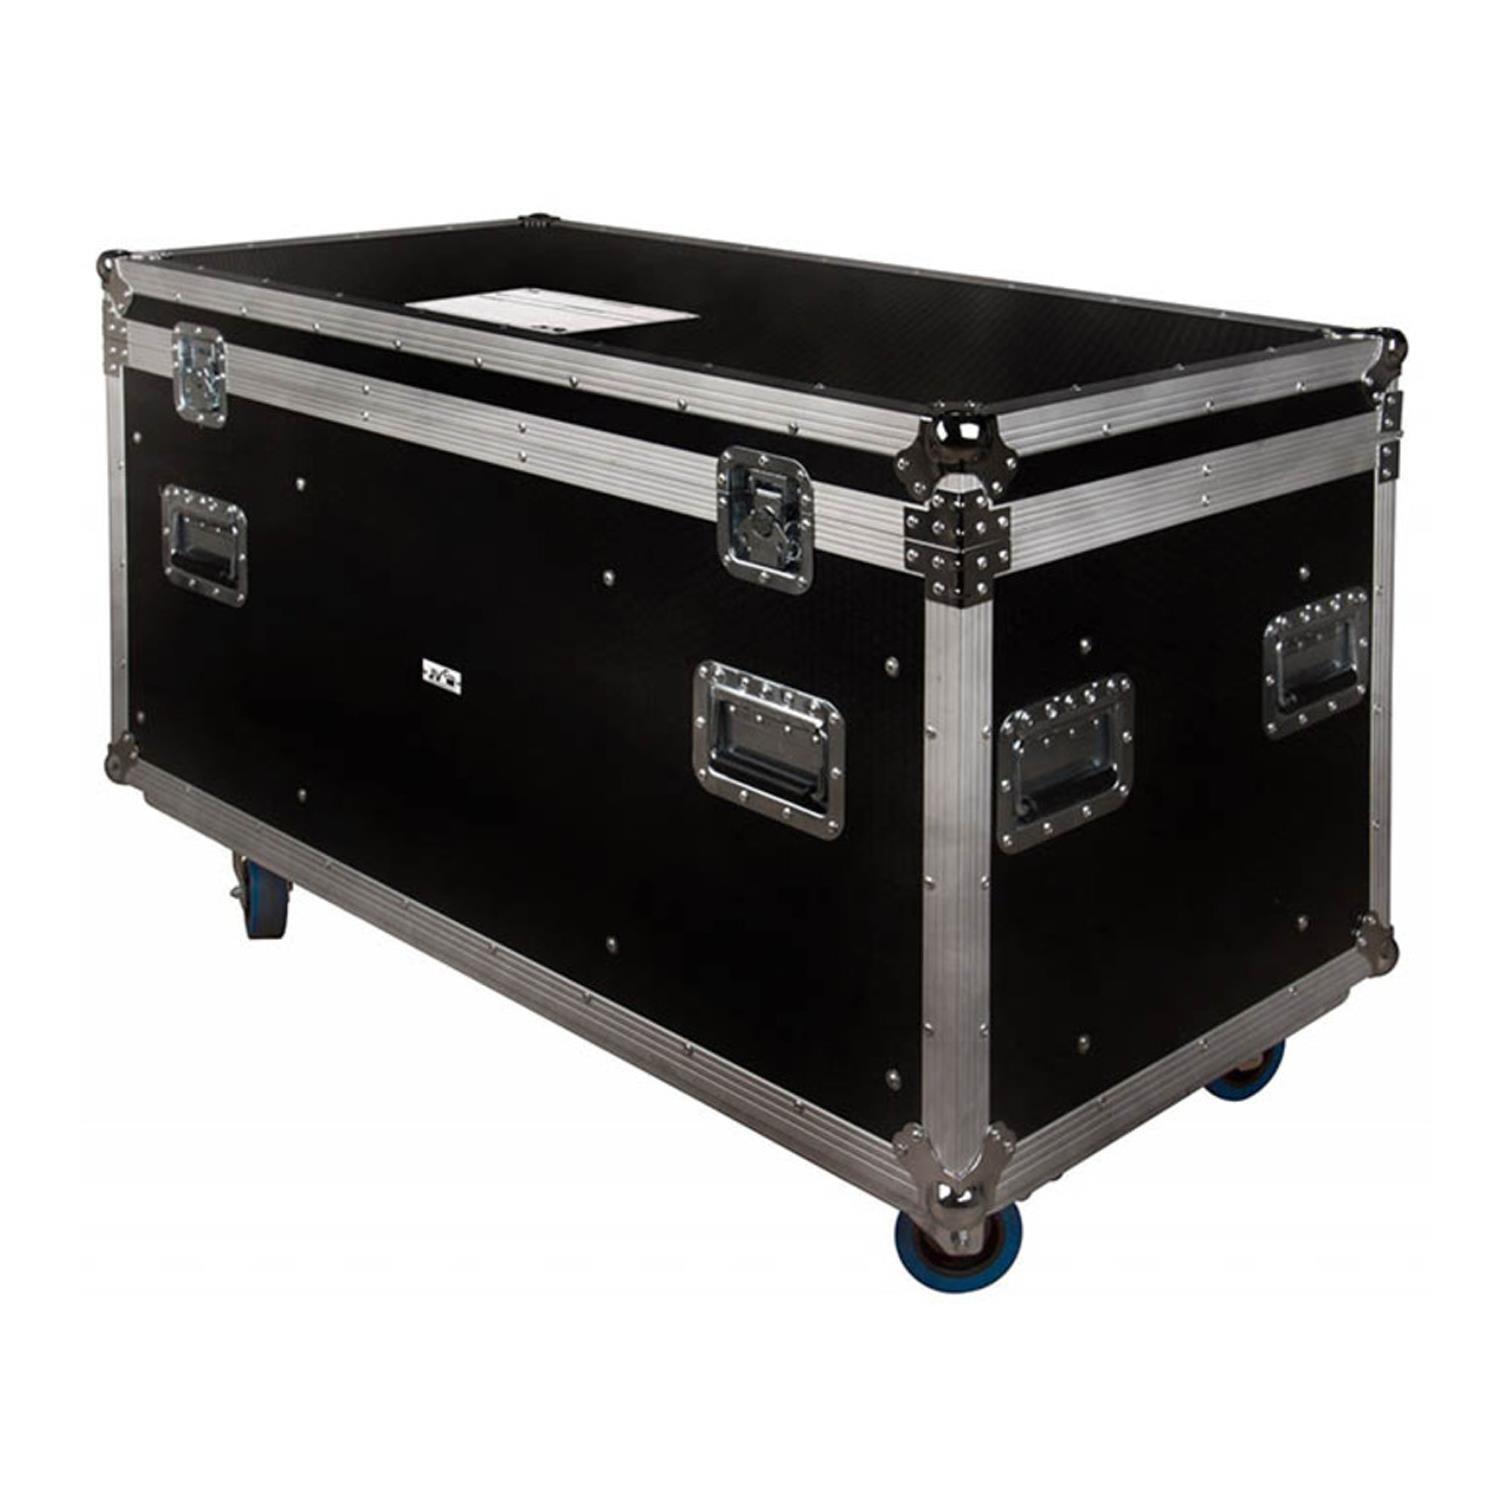 StageCore FC66 Transport case. Including 2 x Dividers & 1 x Drawer - DY Pro Audio